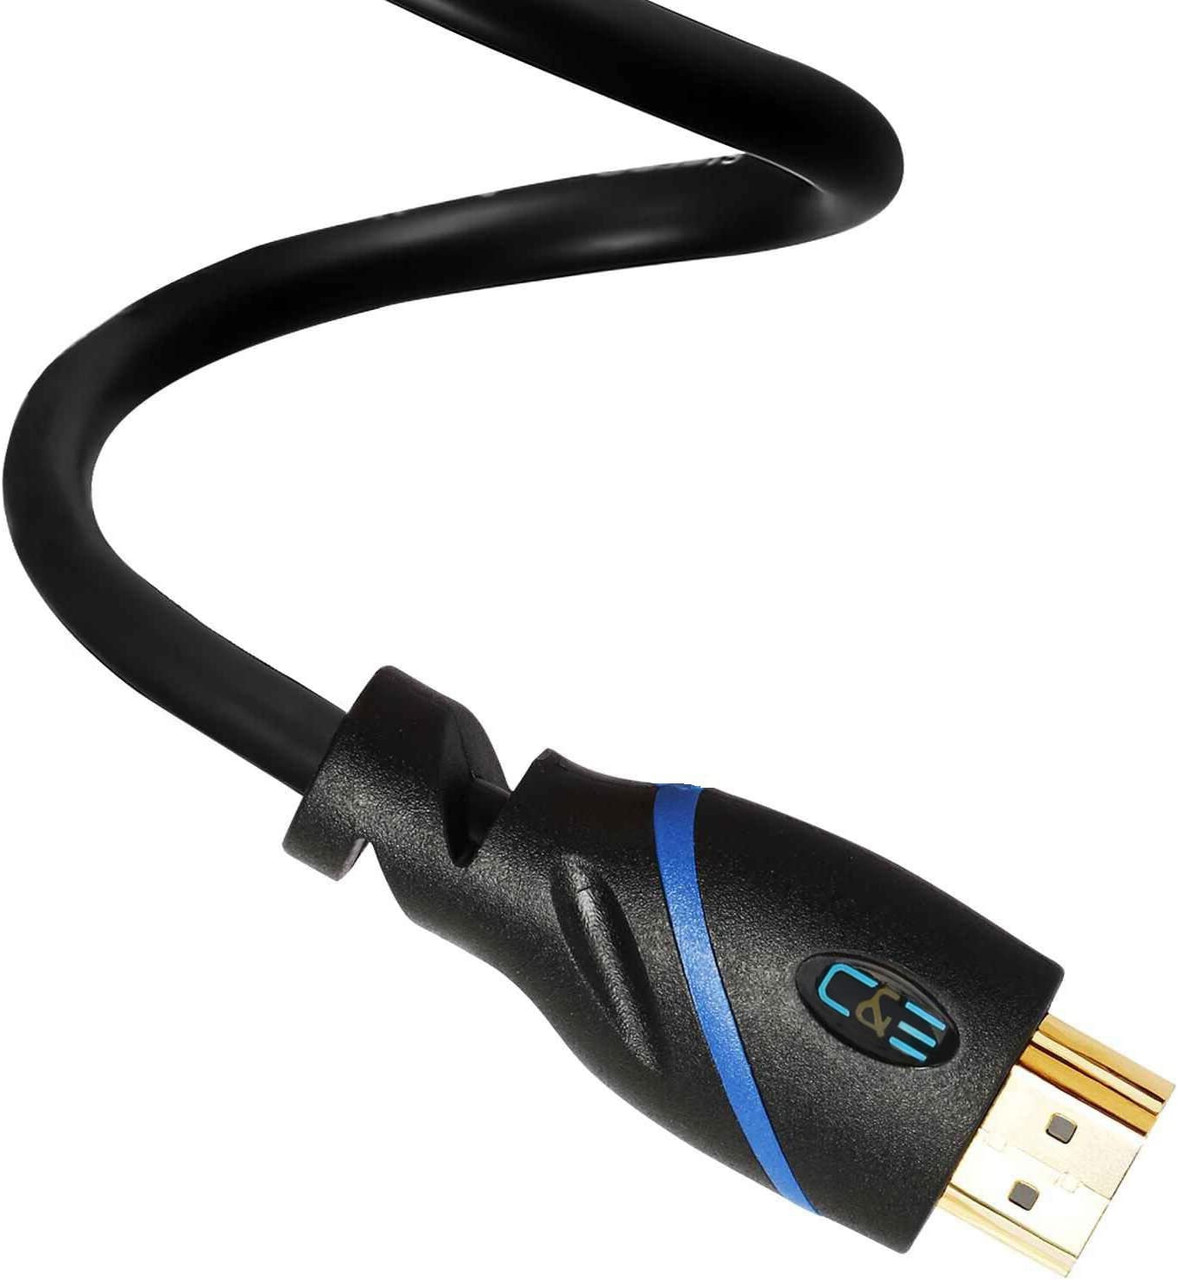 30ft (9.1M) High Speed HDMI Cable Male to Male with Ethernet Black (30 Feet/9.1 Meters) Supports 4K 30Hz, 3D, 1080p and Audio Return30ft (9.1M) High Speed HDMI Cable Male to Male with Ethernet Black (30 Feet/9.1 Meters) Supports 4K 30Hz, 3D, 1080p and Audio Return